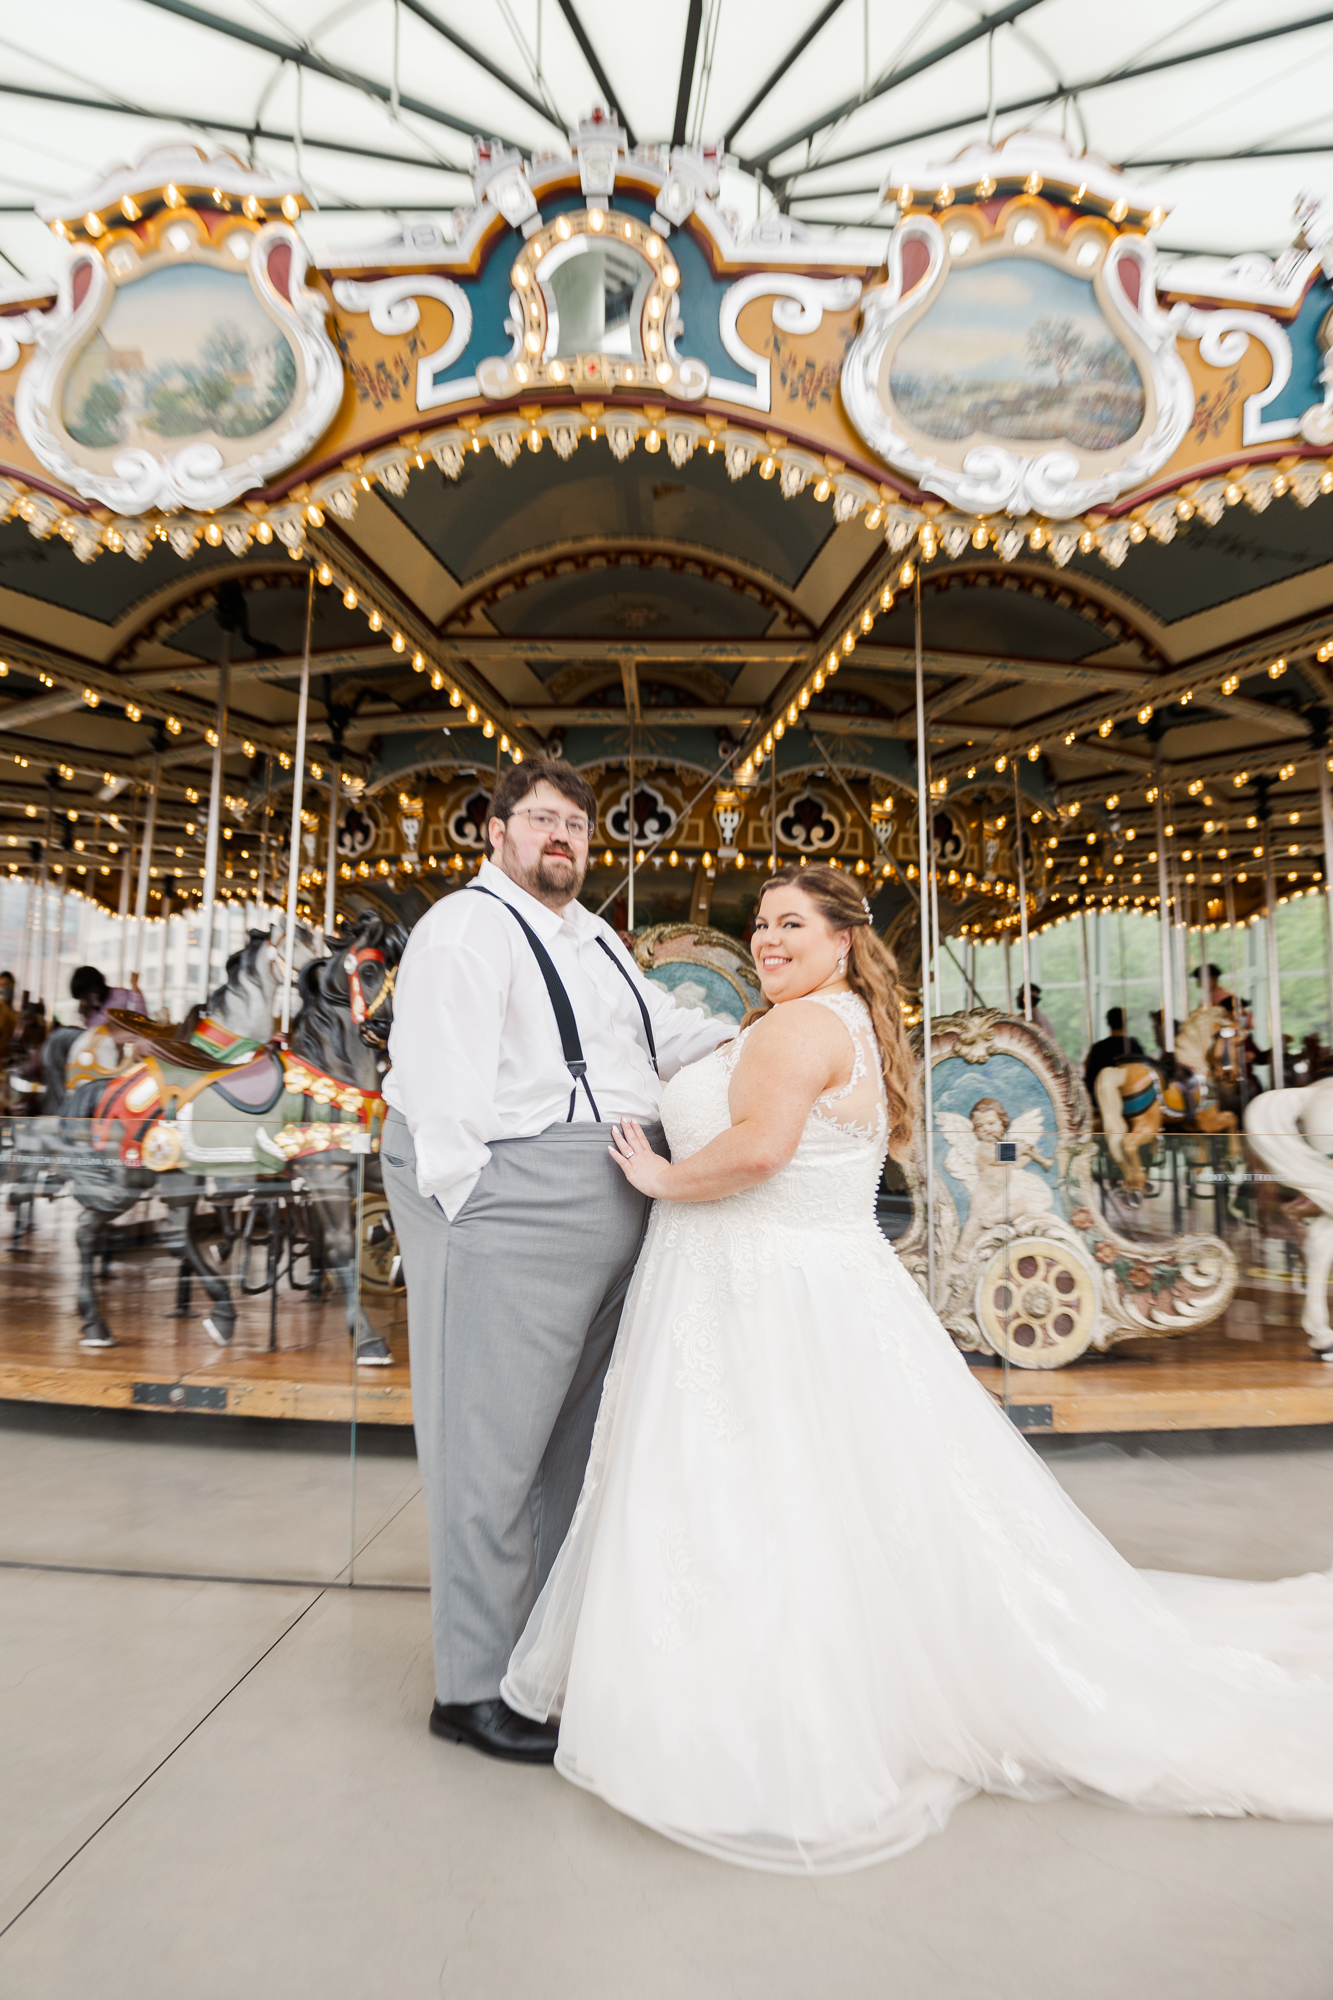 Awesome Jane's Carousel Wedding in New York